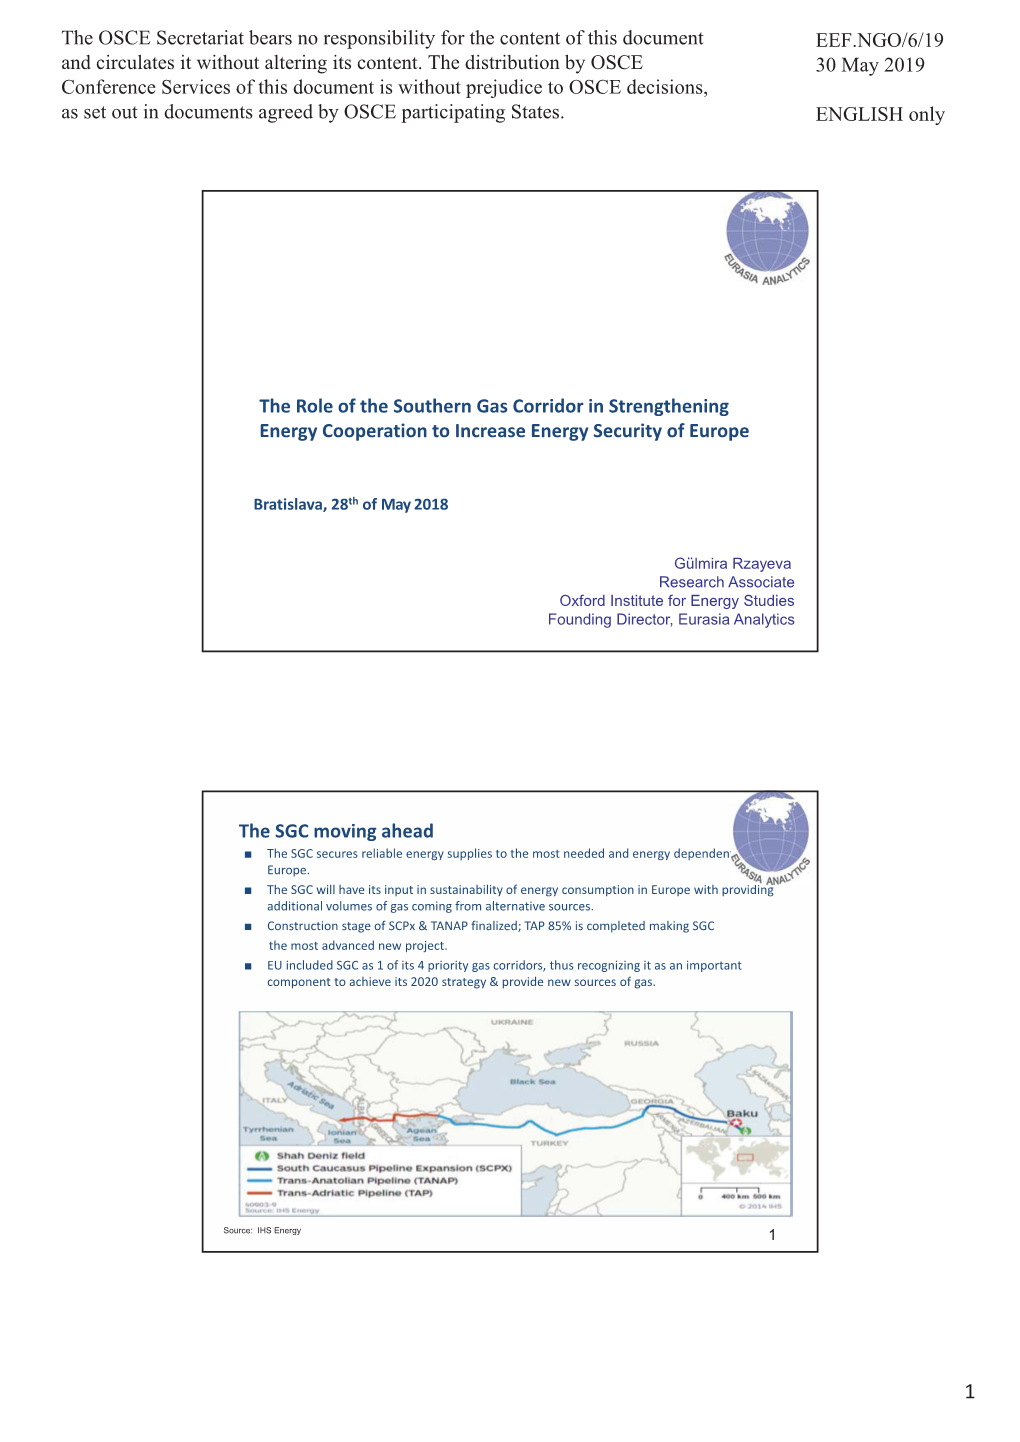 The Role of the Southern Gas Corridor in Strengthening Energy